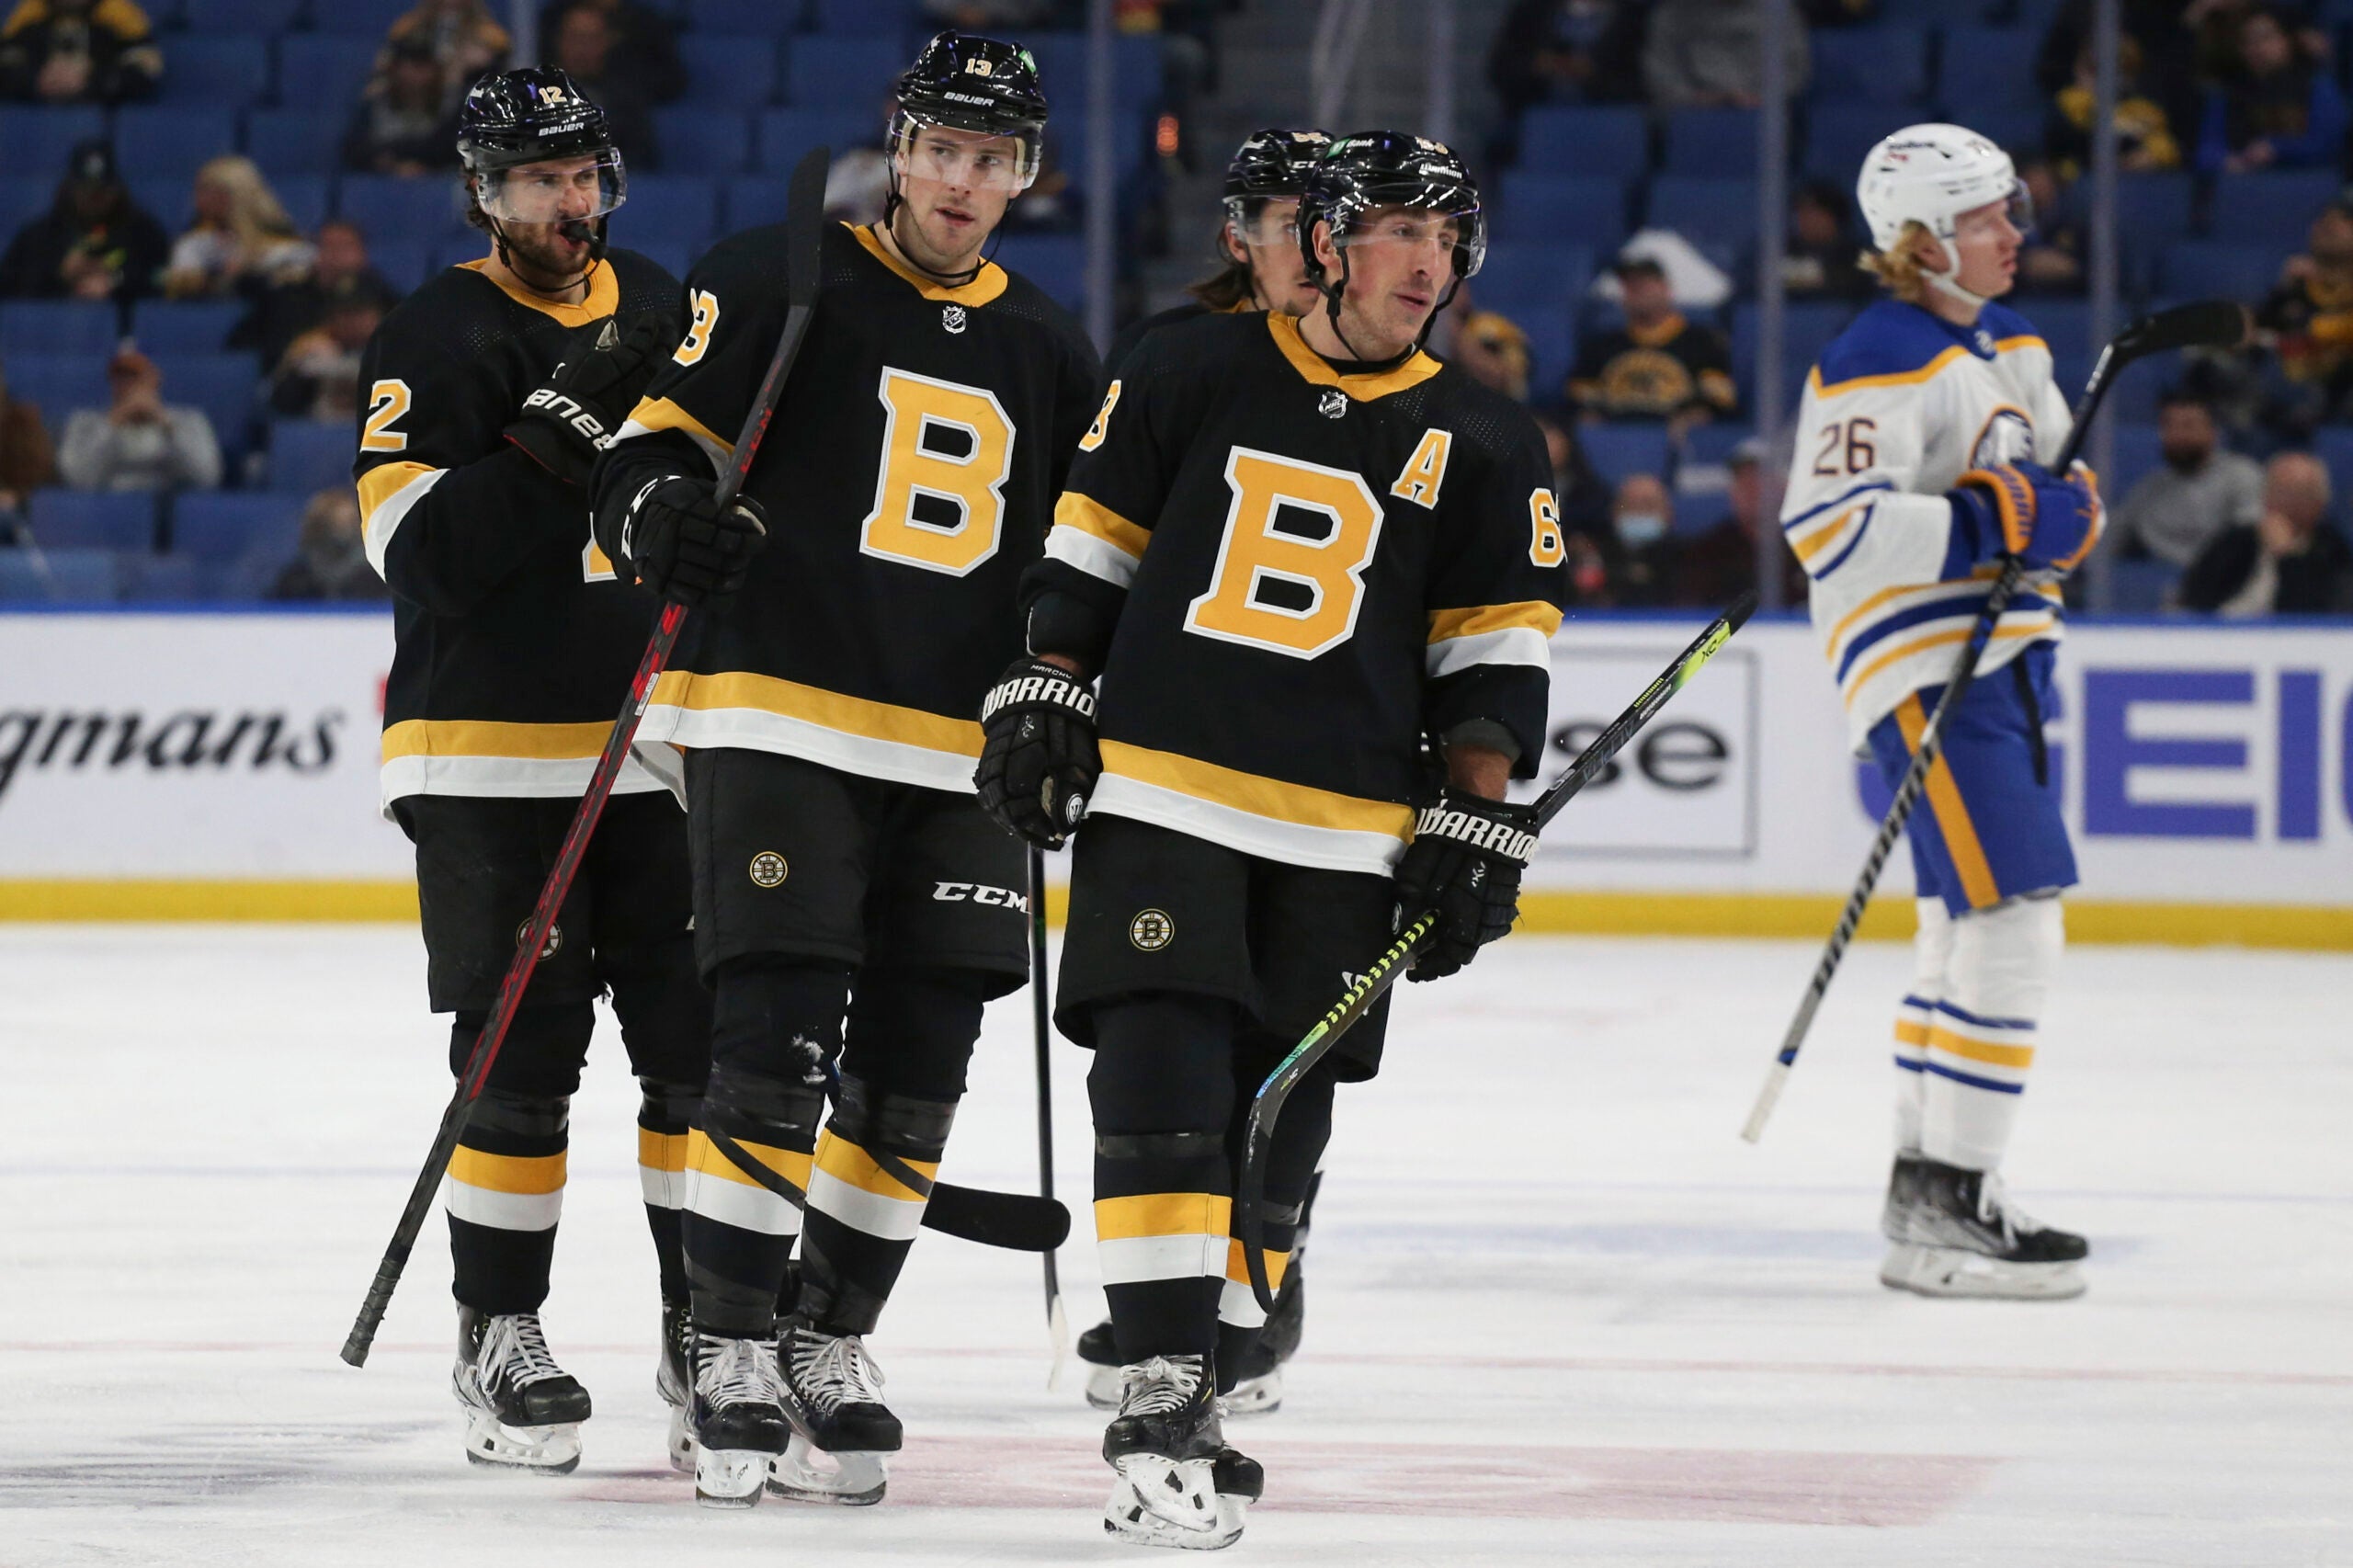 Charlie Coyle, Linus Ullmark lead Bruins to 41 win over Sabres